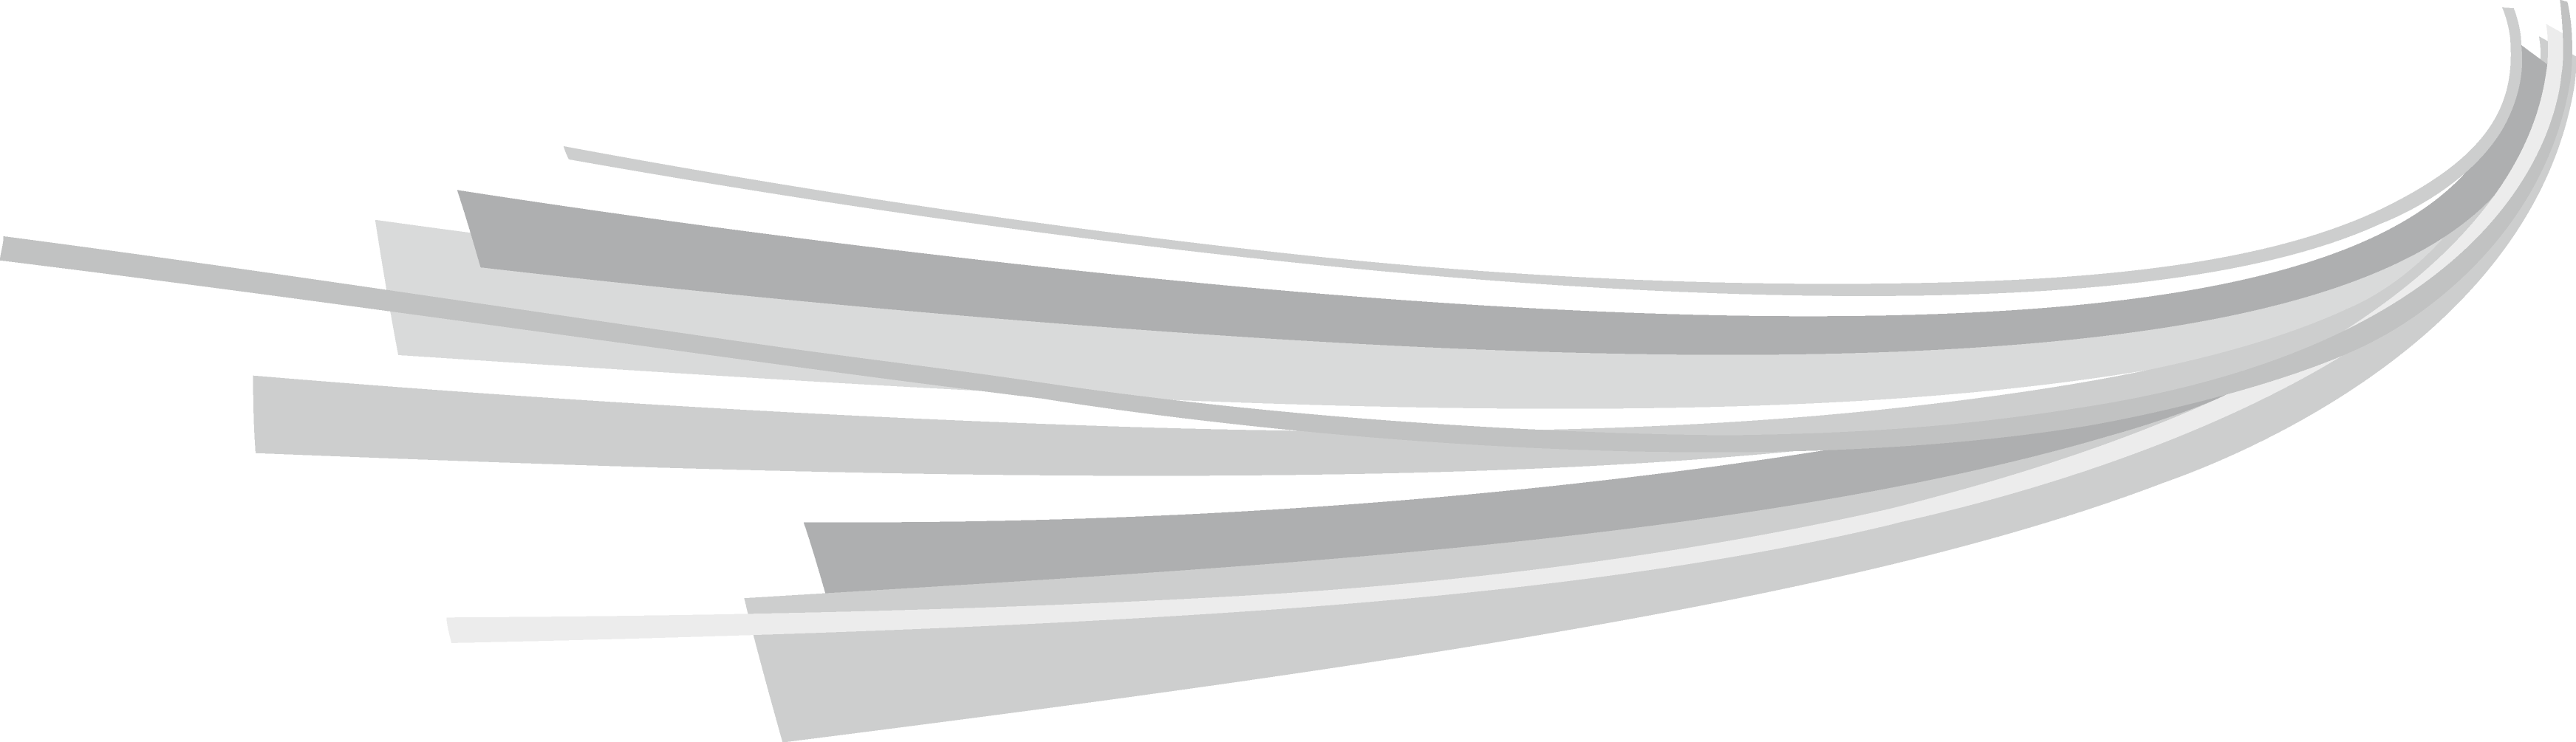 Grey Abstract Lines PNG Image with Transparent Background ...